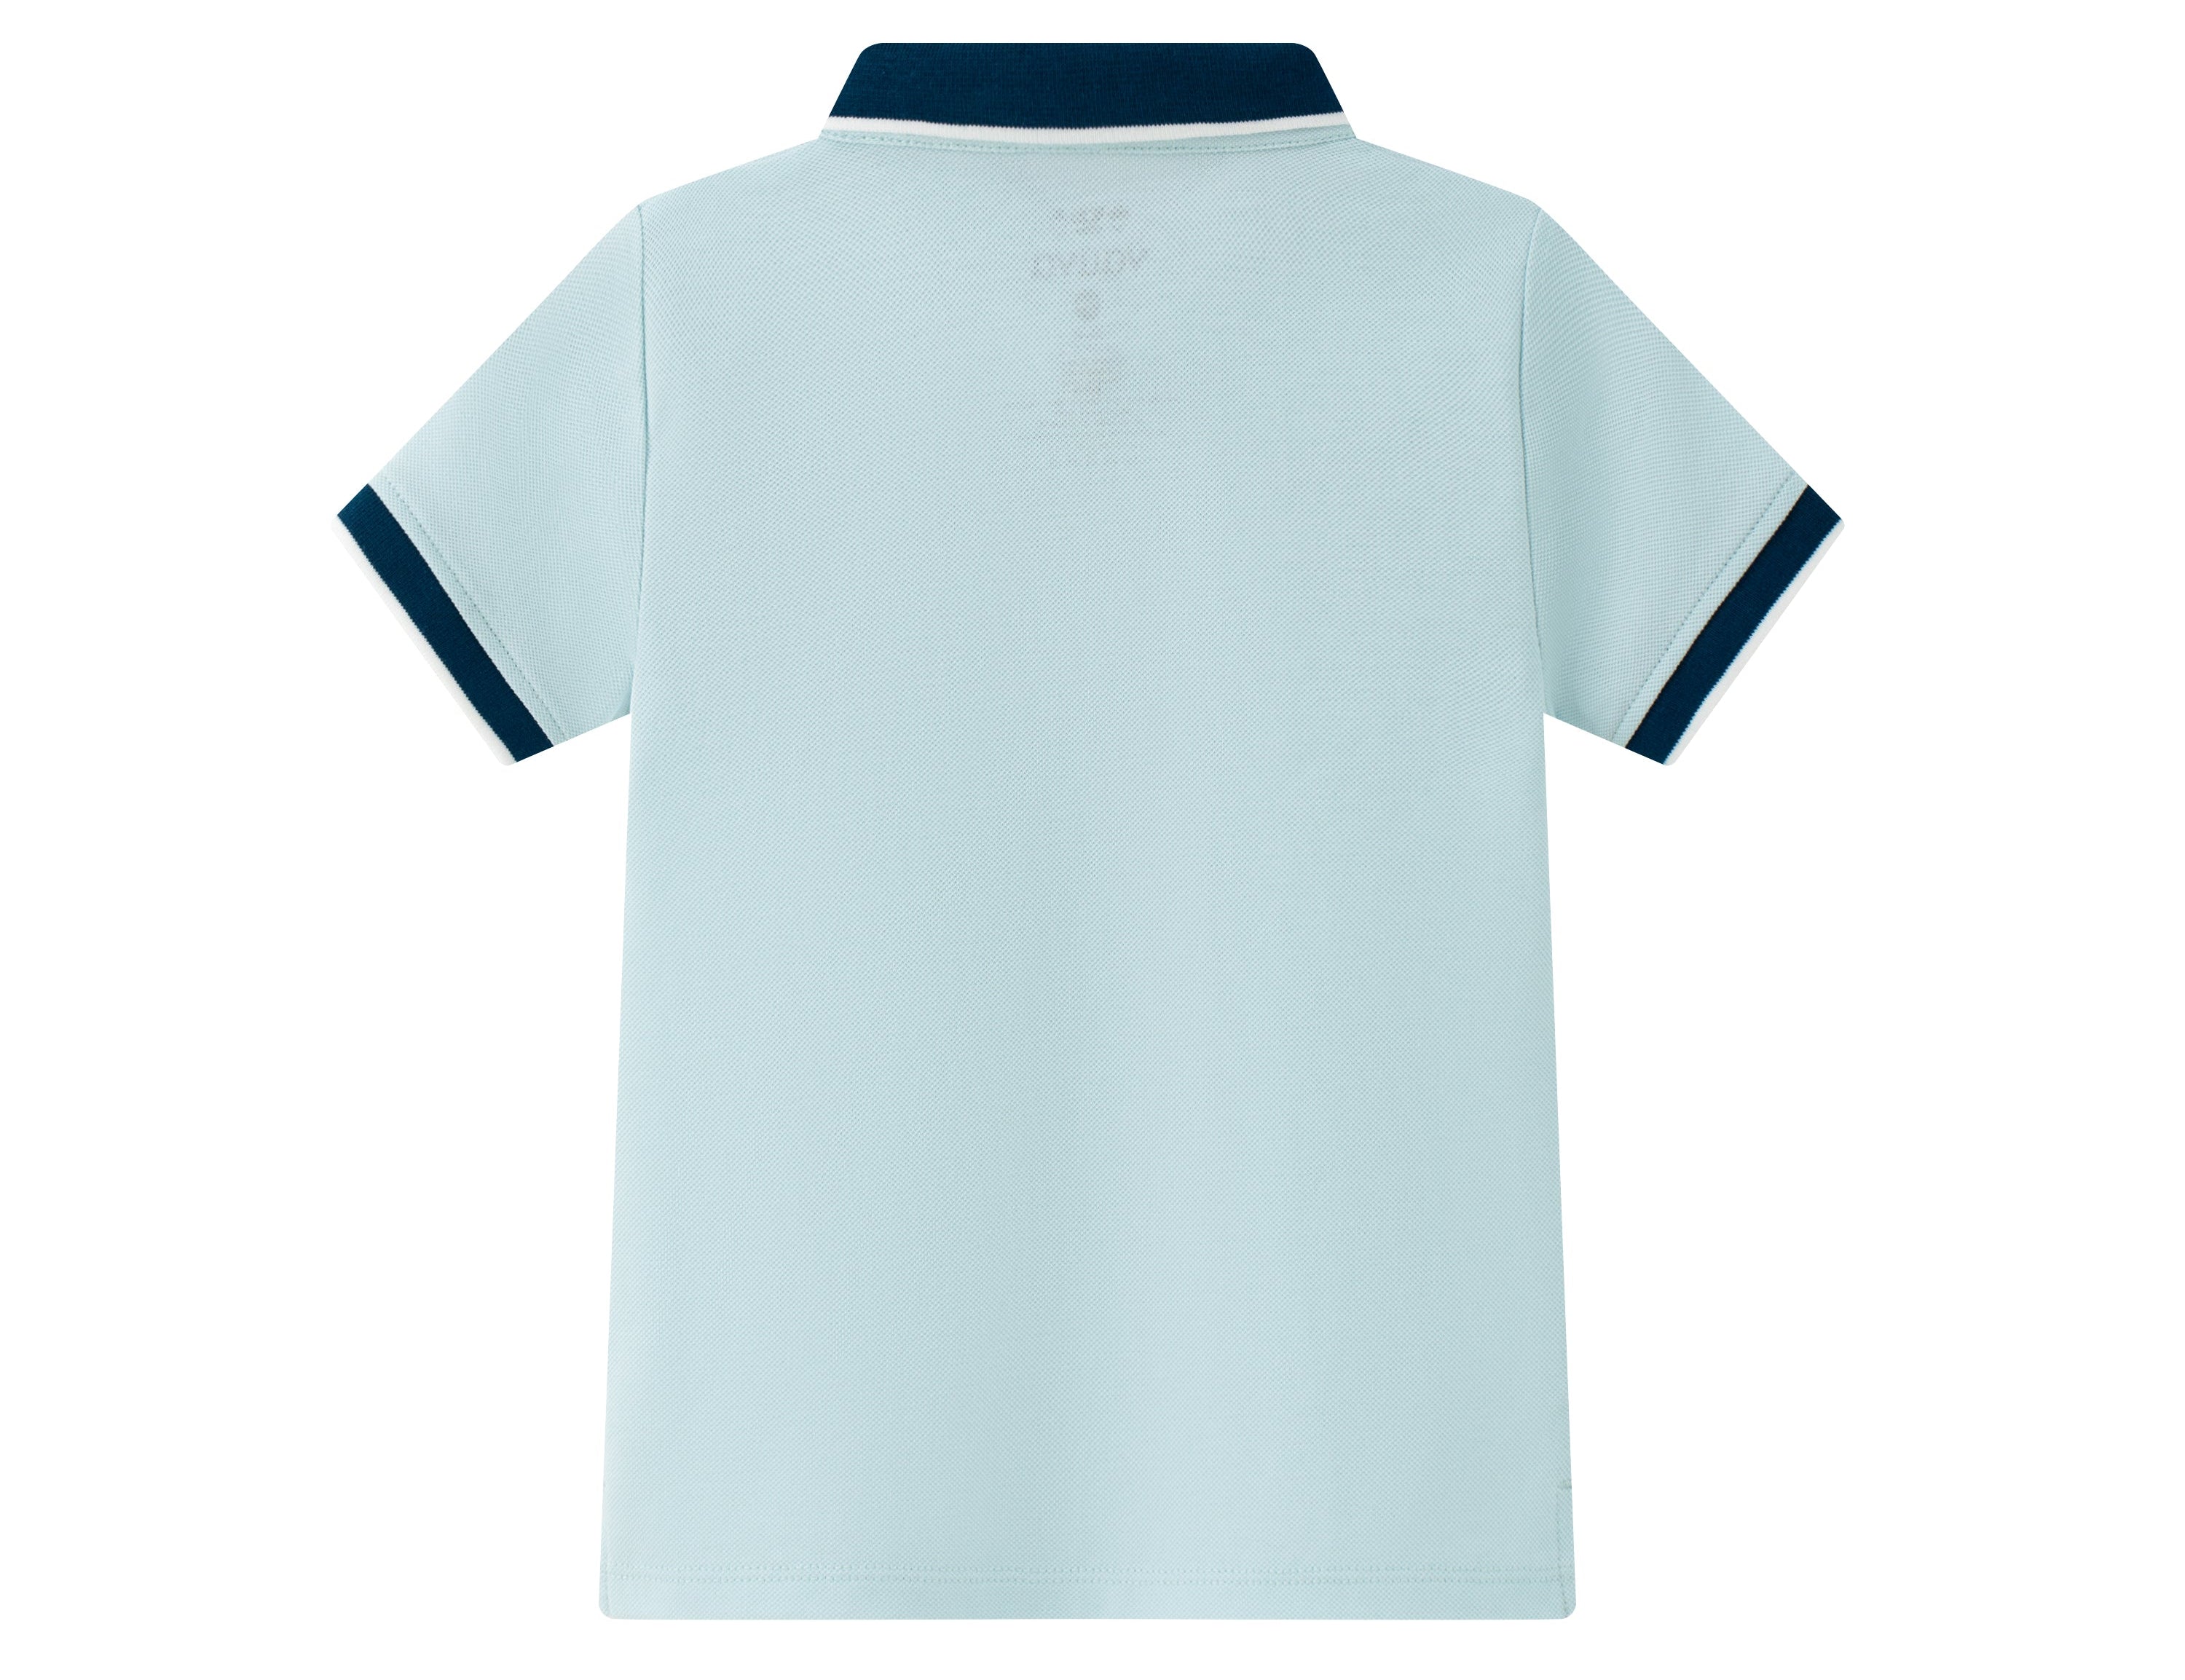 Vauva SS24 - Baby Boy Short Sleeves Polo Top (Blue) - Product 2